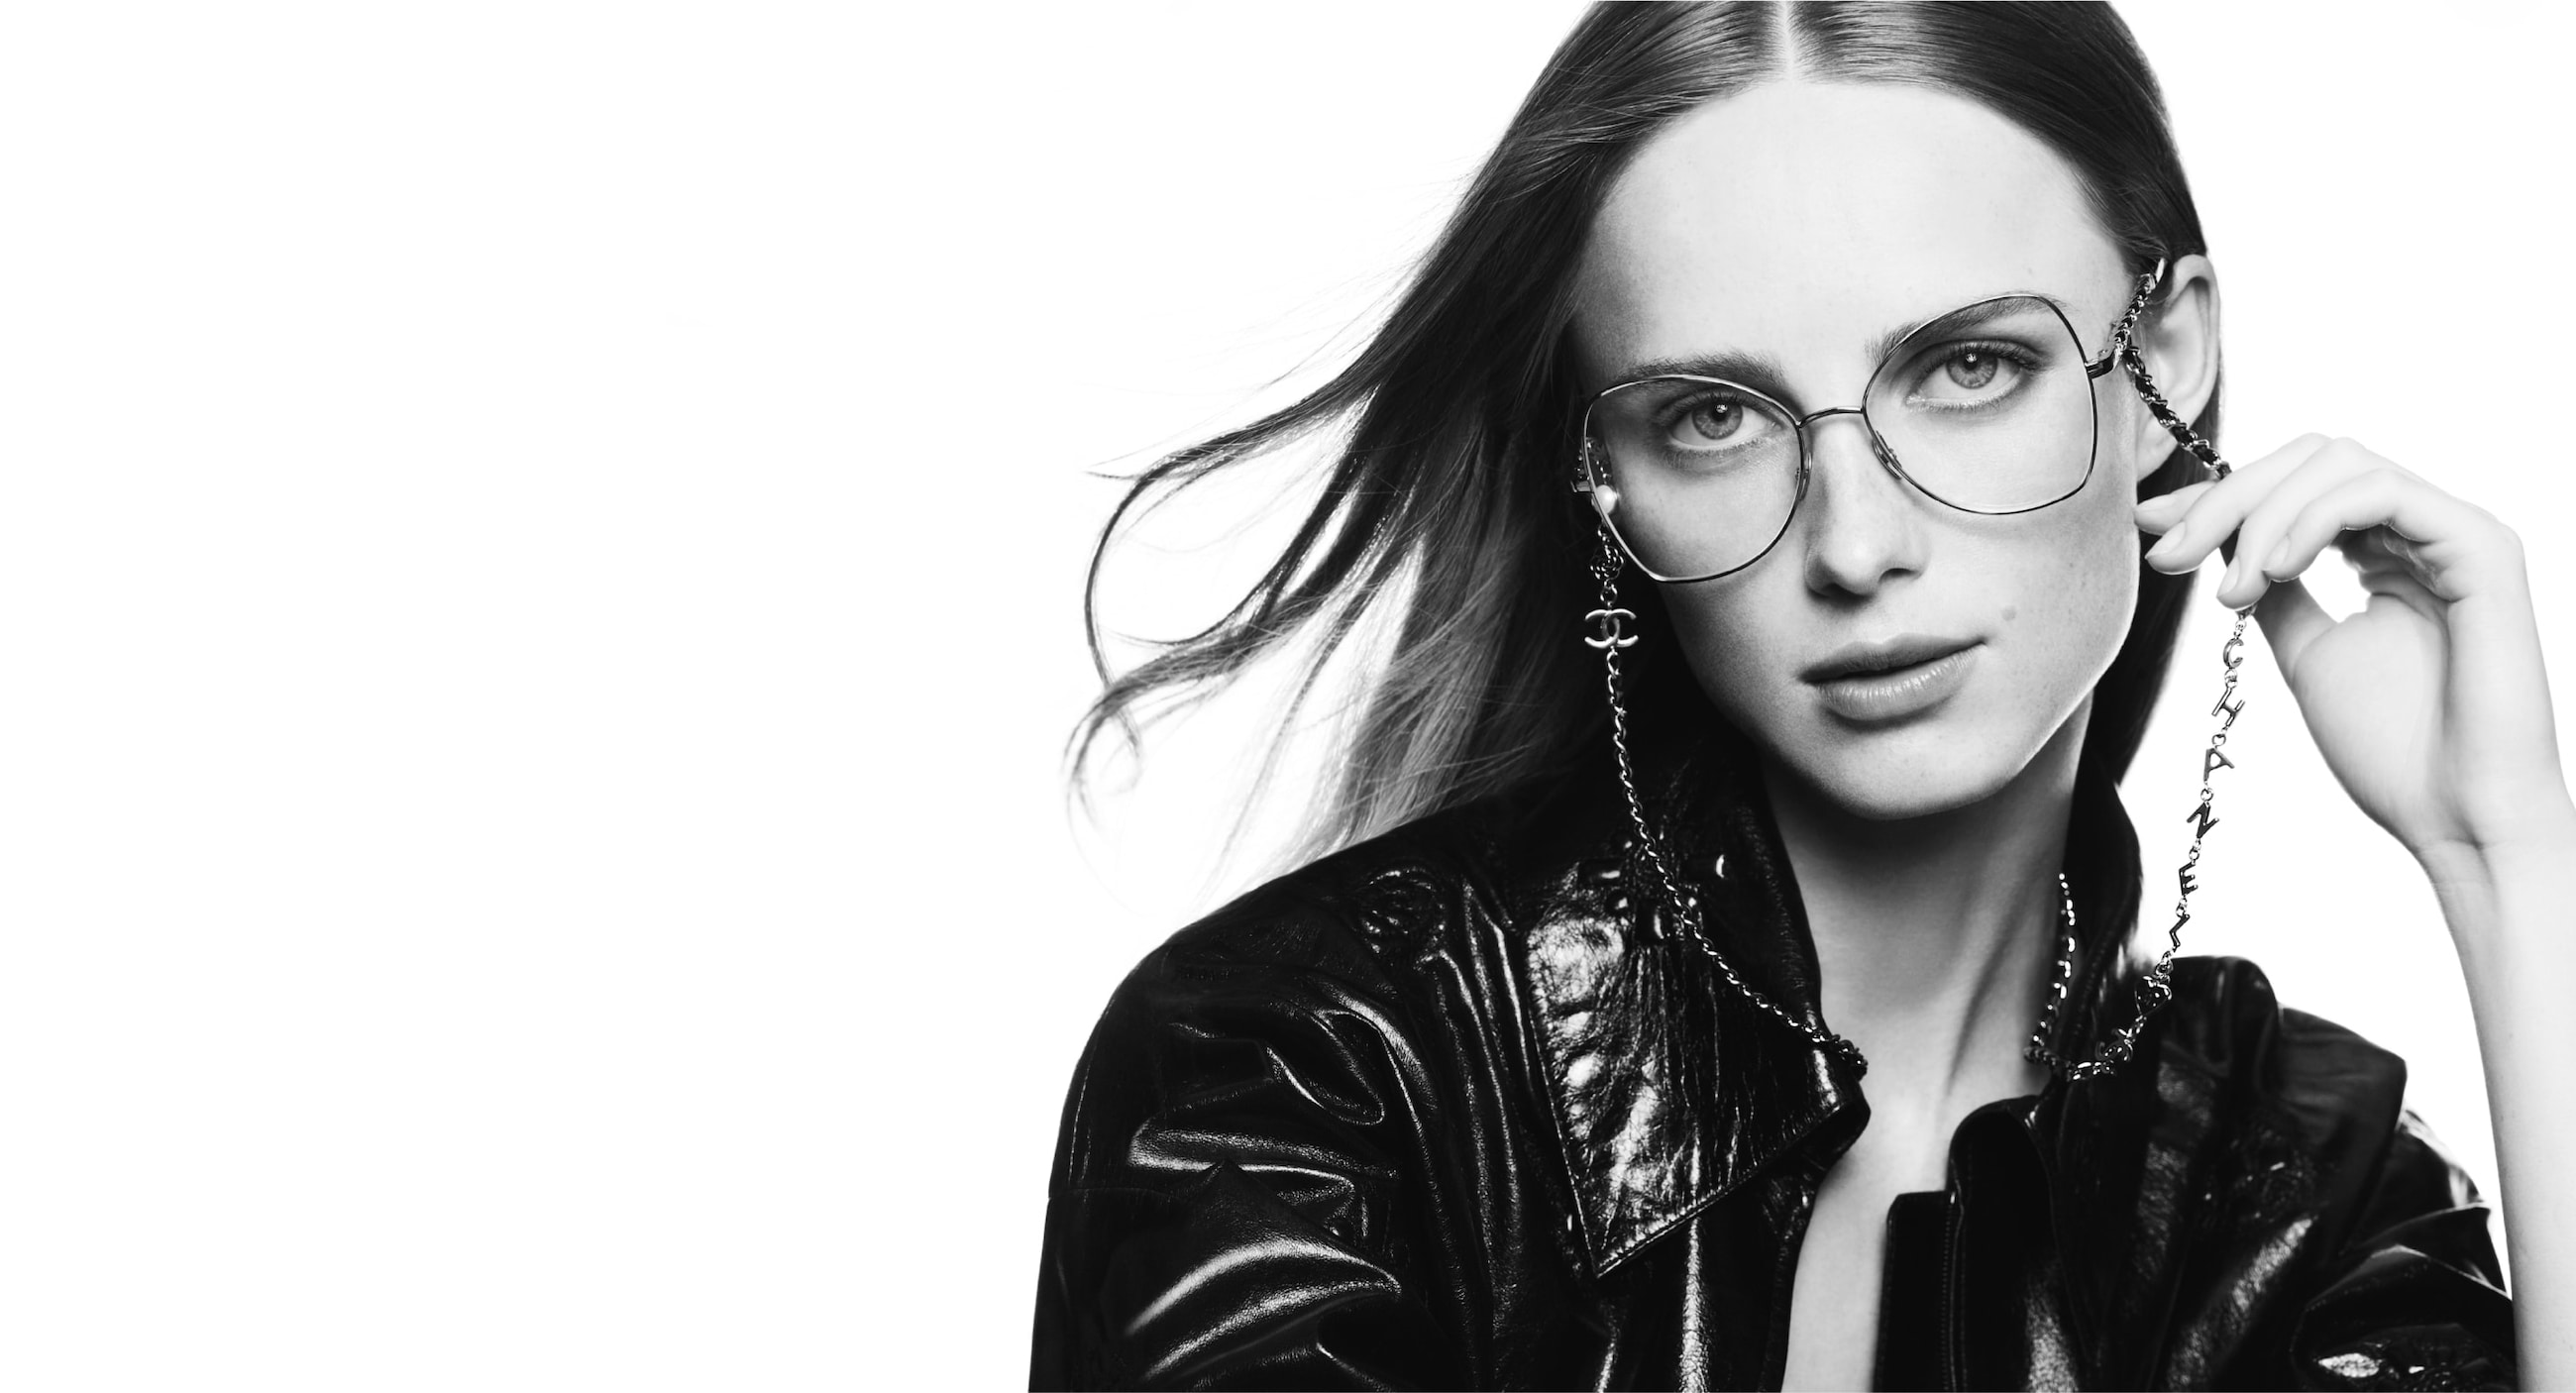 Looking for 2020 Vision This Chanel Eyeglasses Launch Has You Covered   Vogue